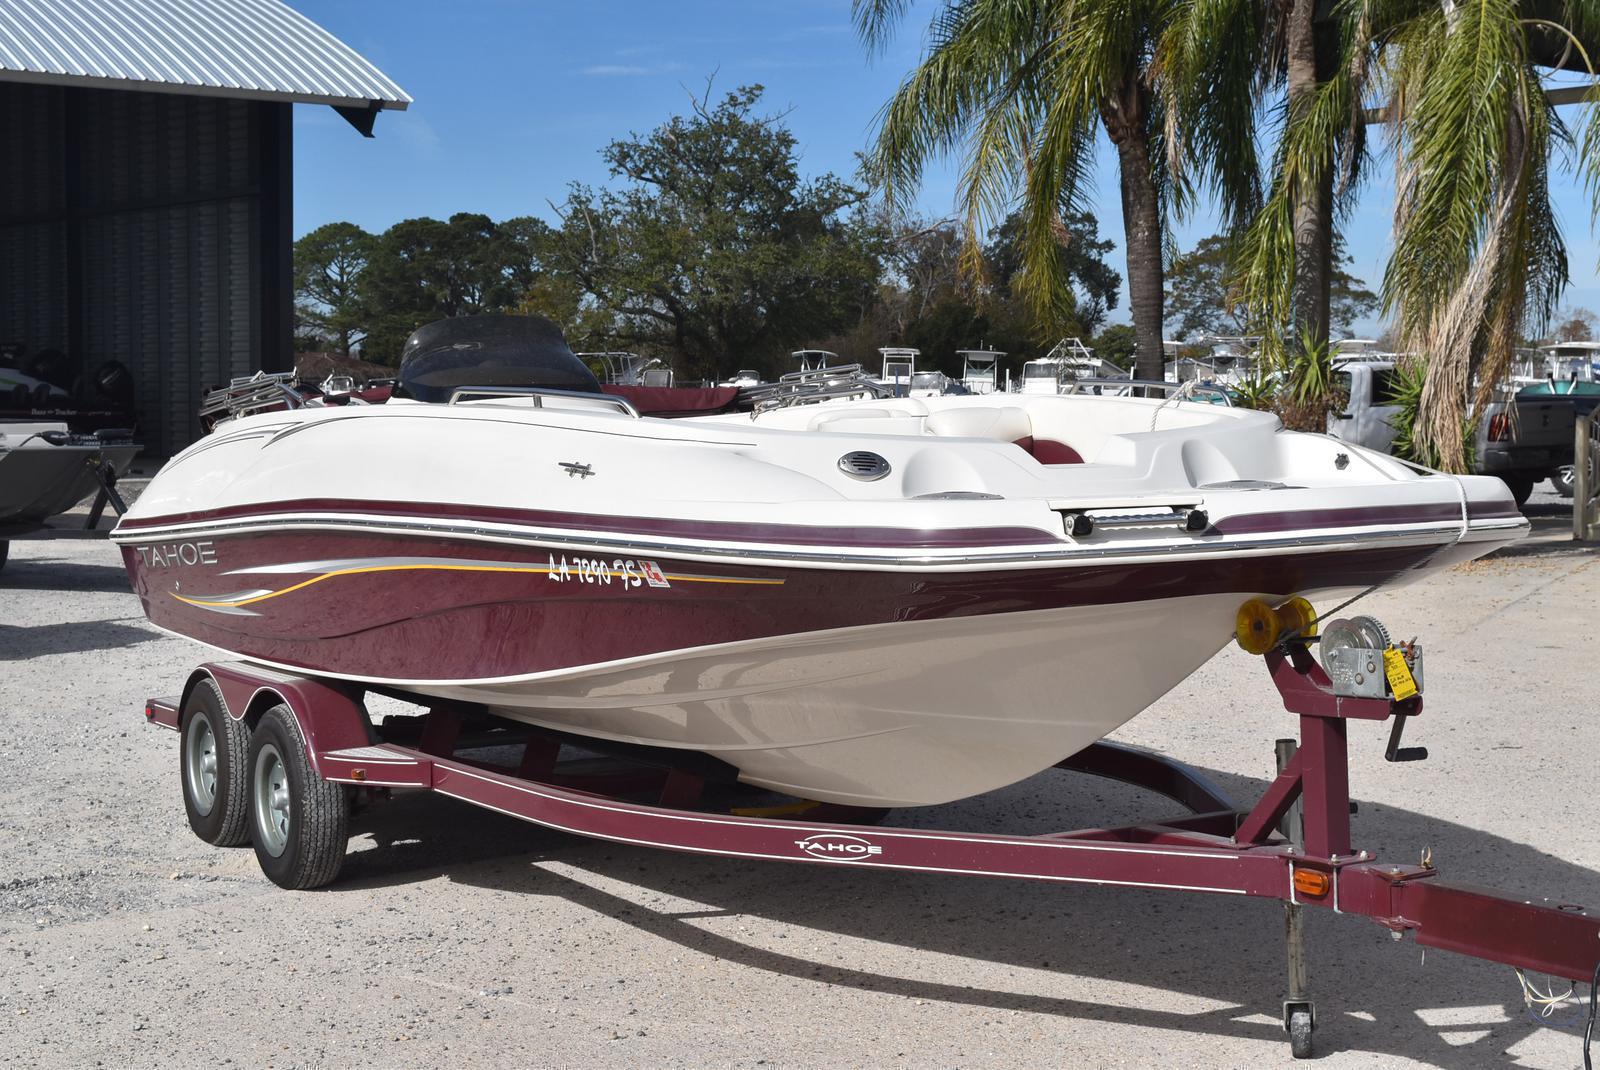 2008 Tahoe boat for sale, model of the boat is 215 & Image # 2 of 20